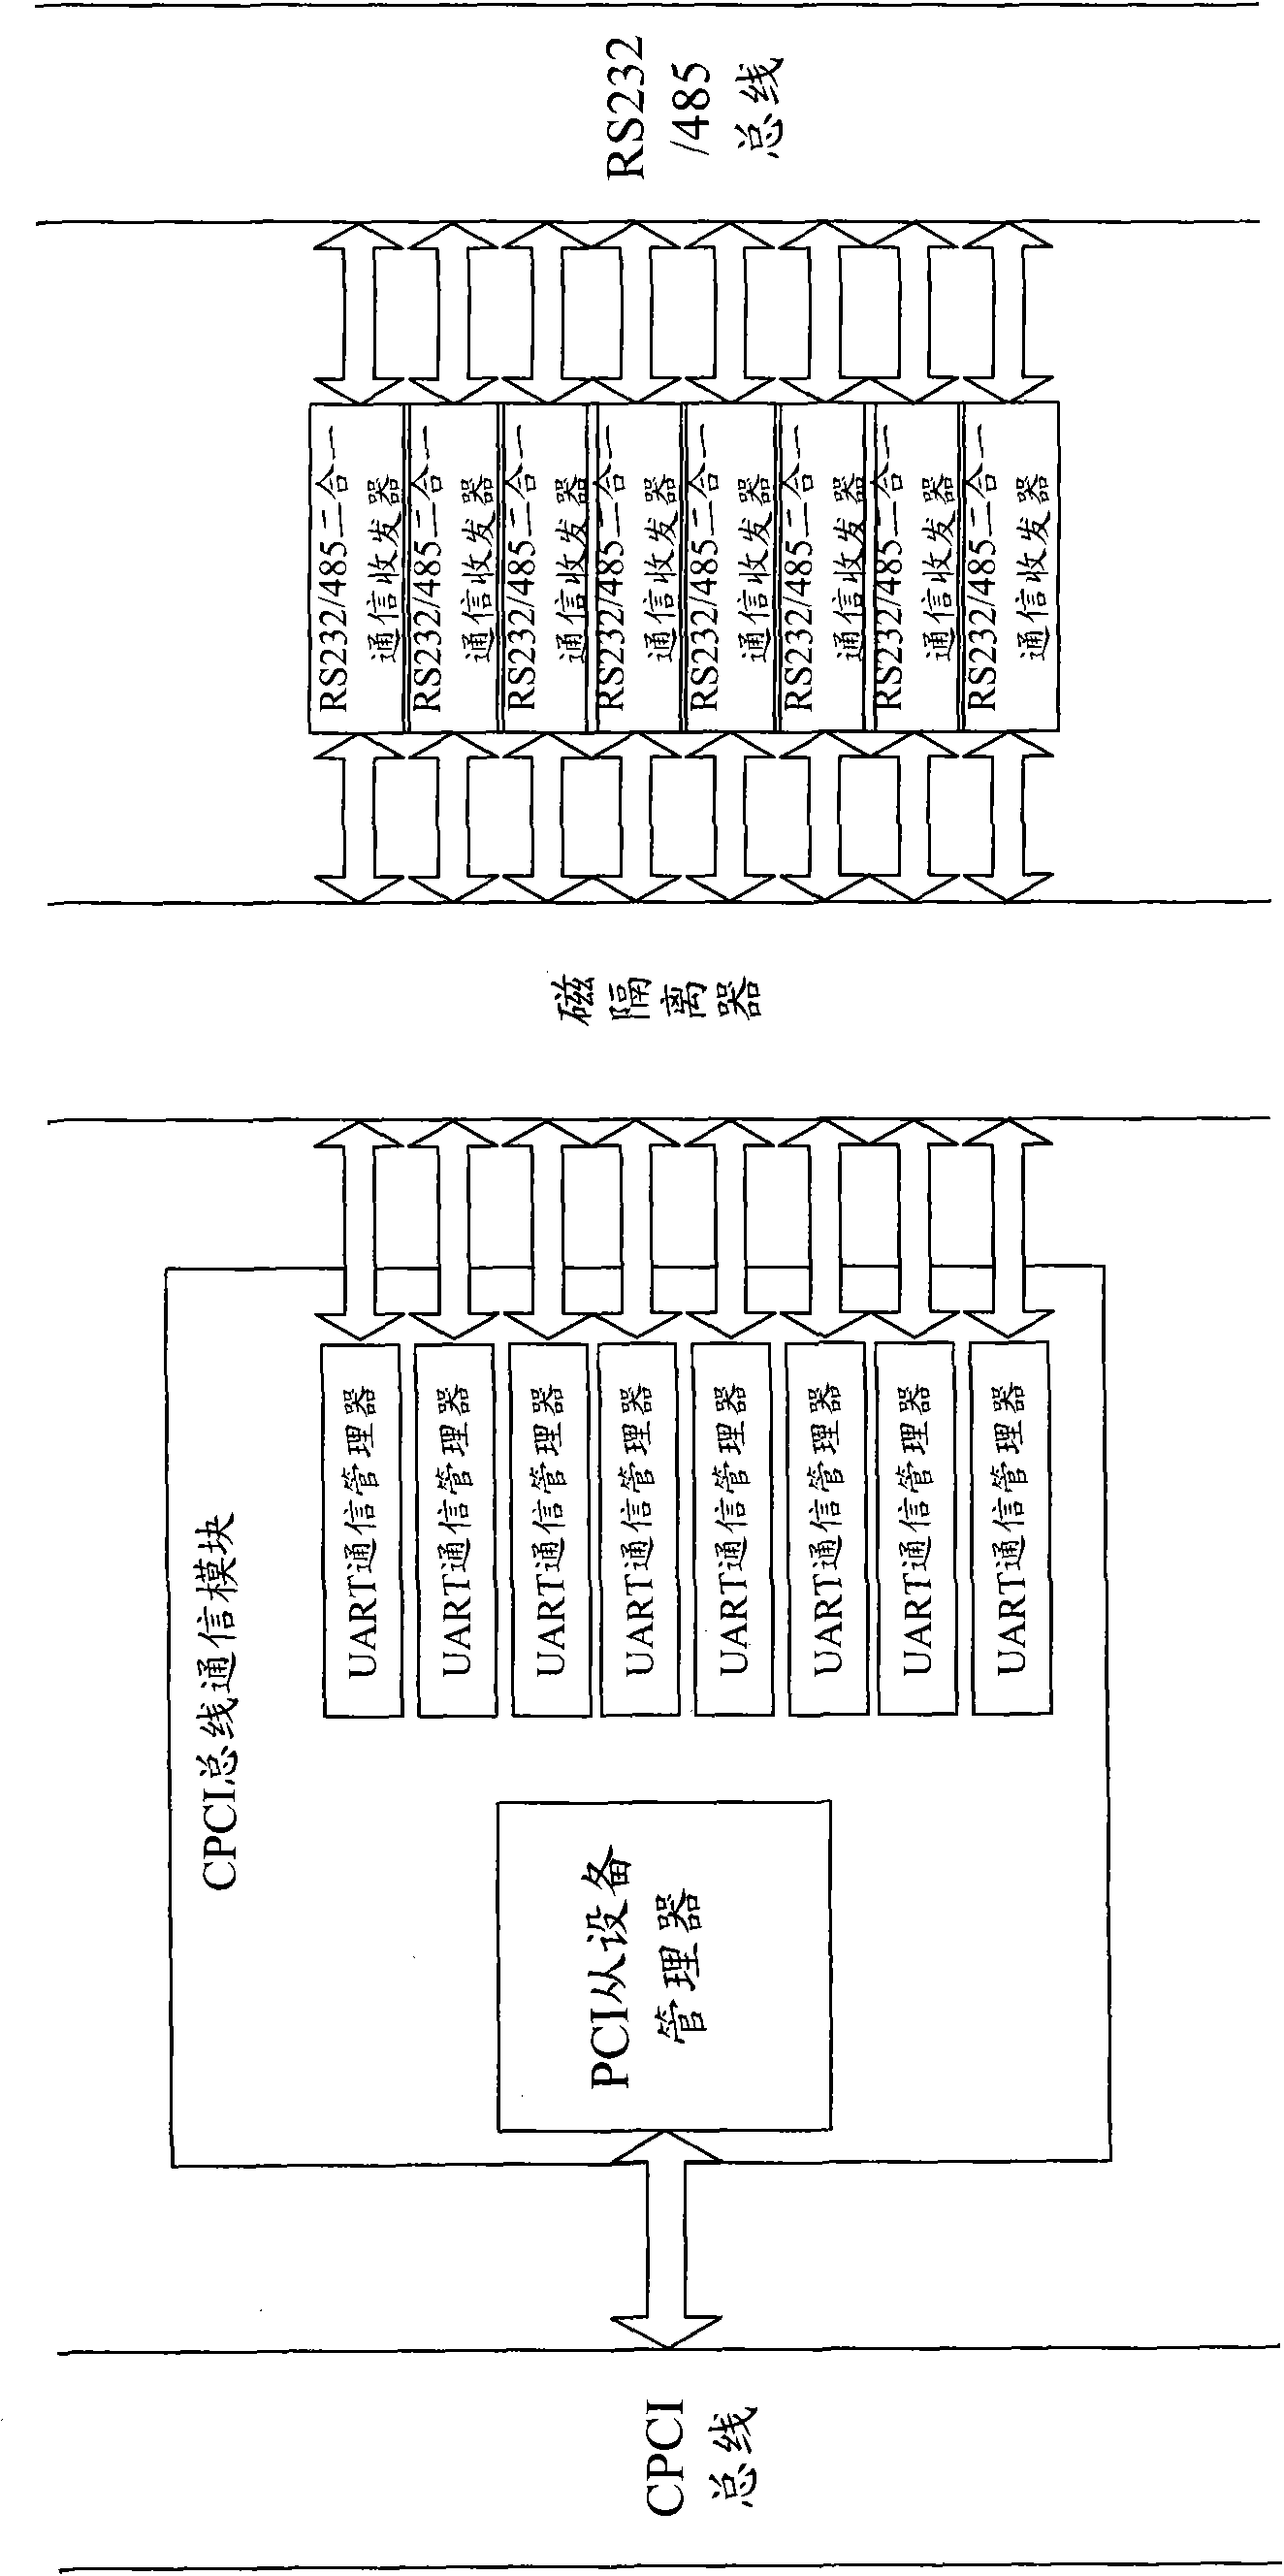 Multi-serial port data communication card equipment based on CPCI bus and method thereof